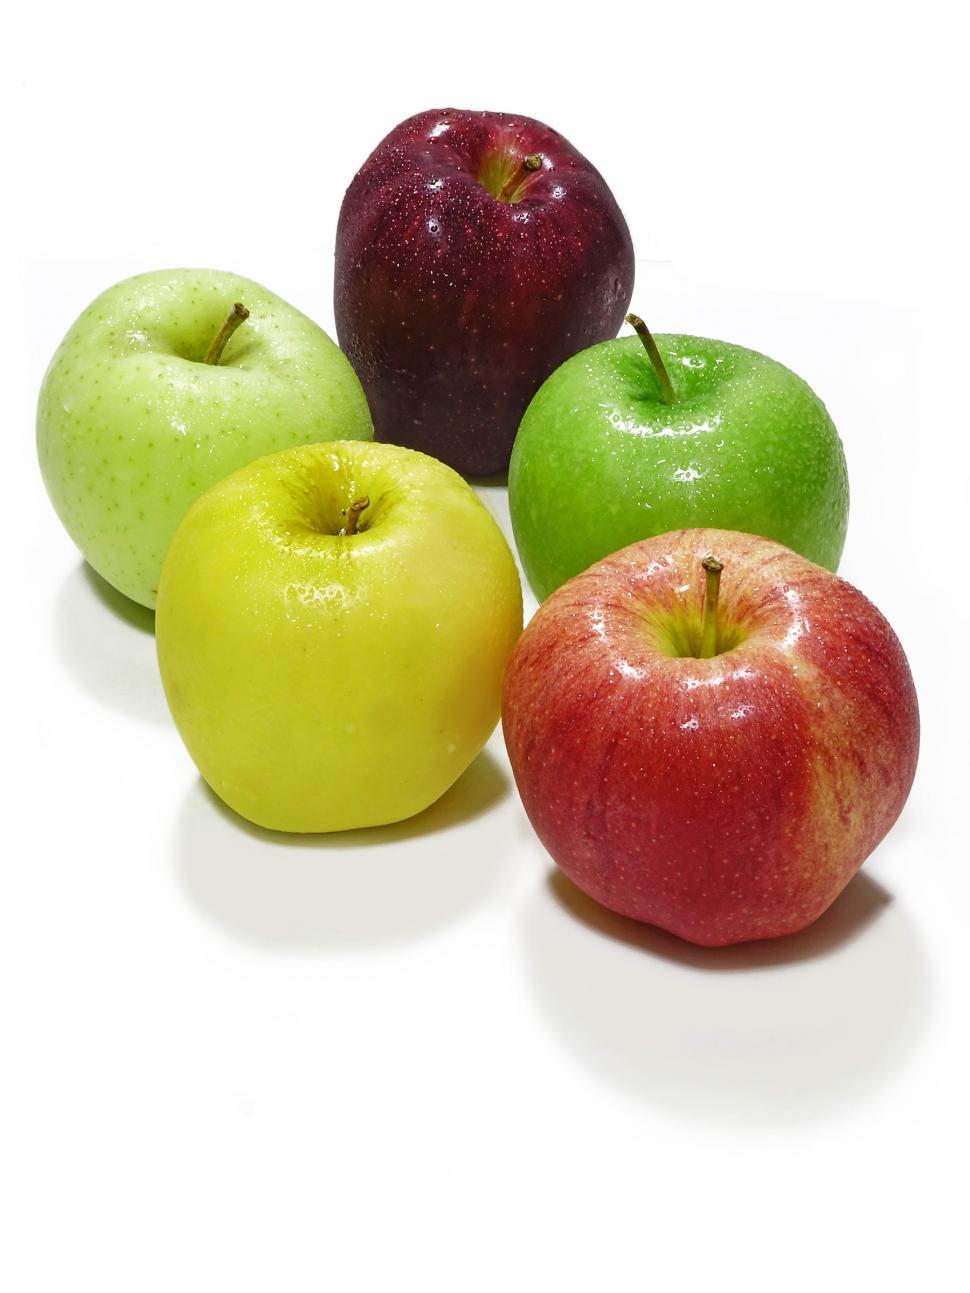 Free Image of Four Apples Arranged Neatly 